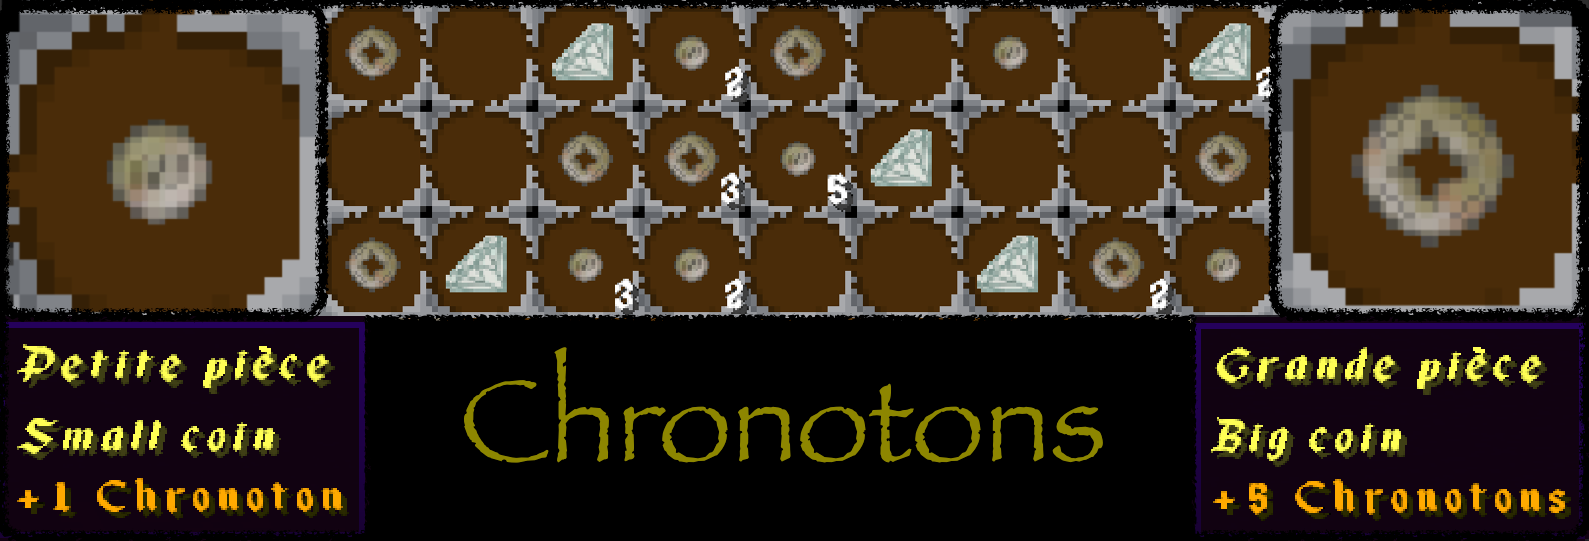 Chronotons-Montage.png